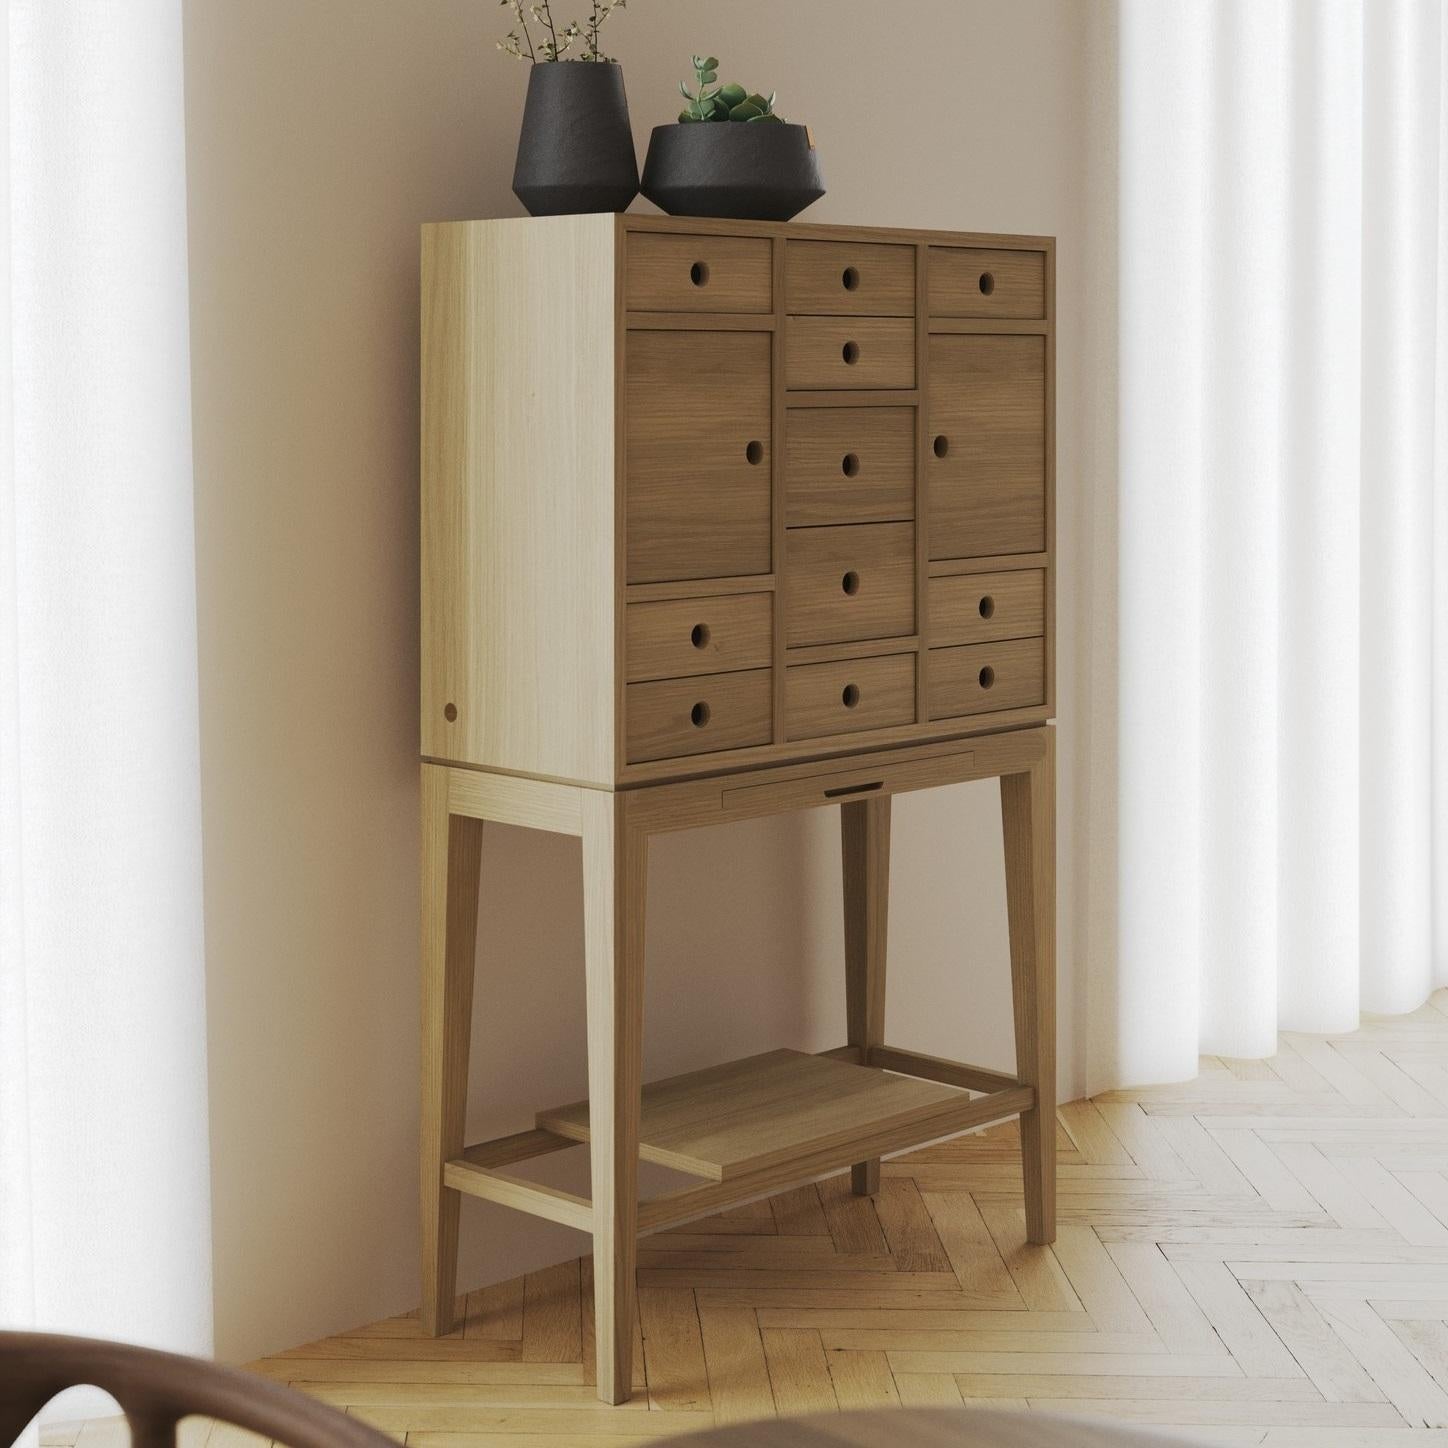 Timeless Solid Oak Cabinet Featuring Practical Storage Space In New Condition For Sale In New York, NY